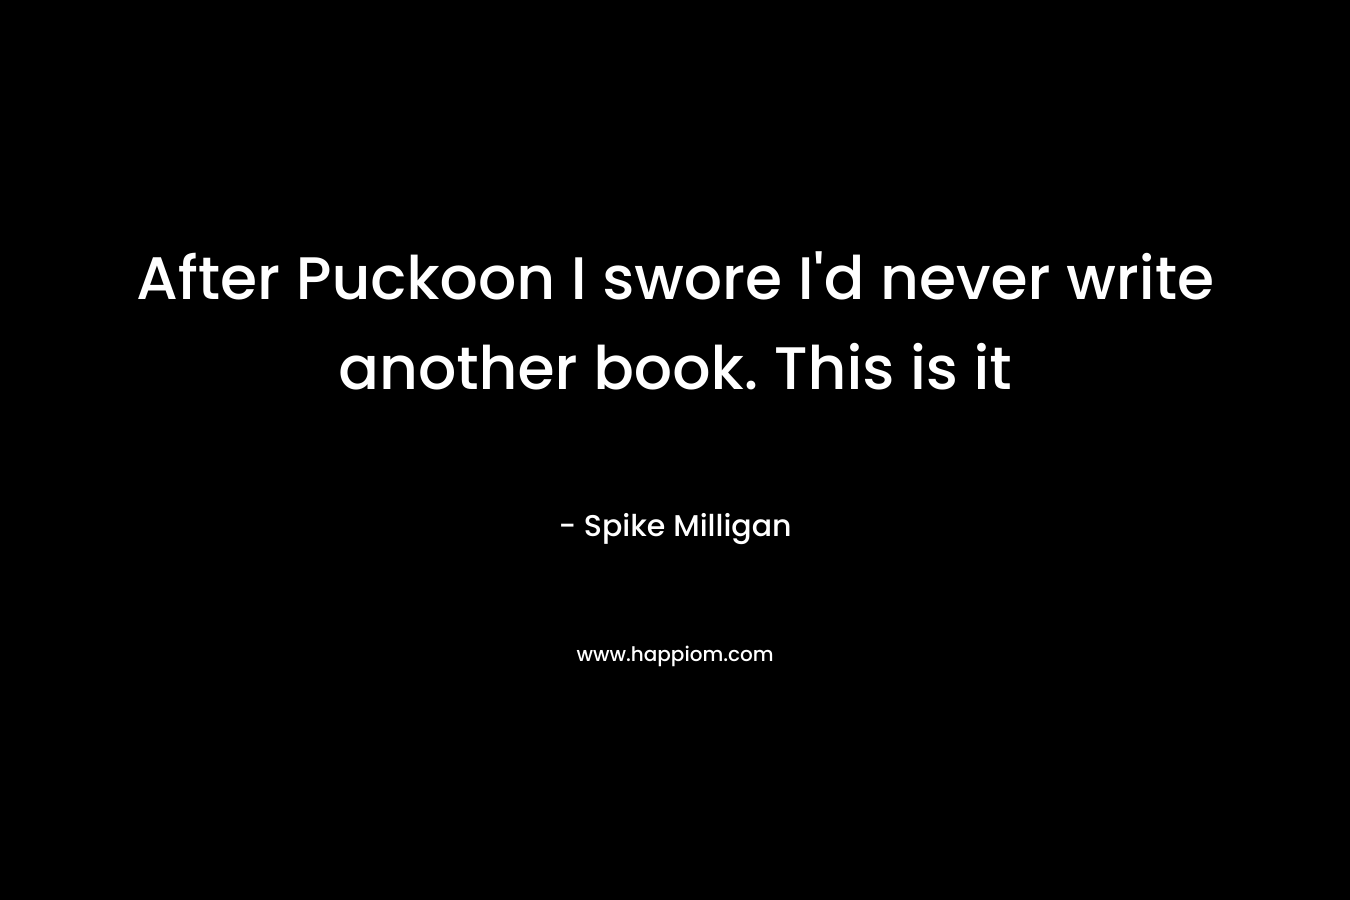 After Puckoon I swore I’d never write another book. This is it – Spike Milligan